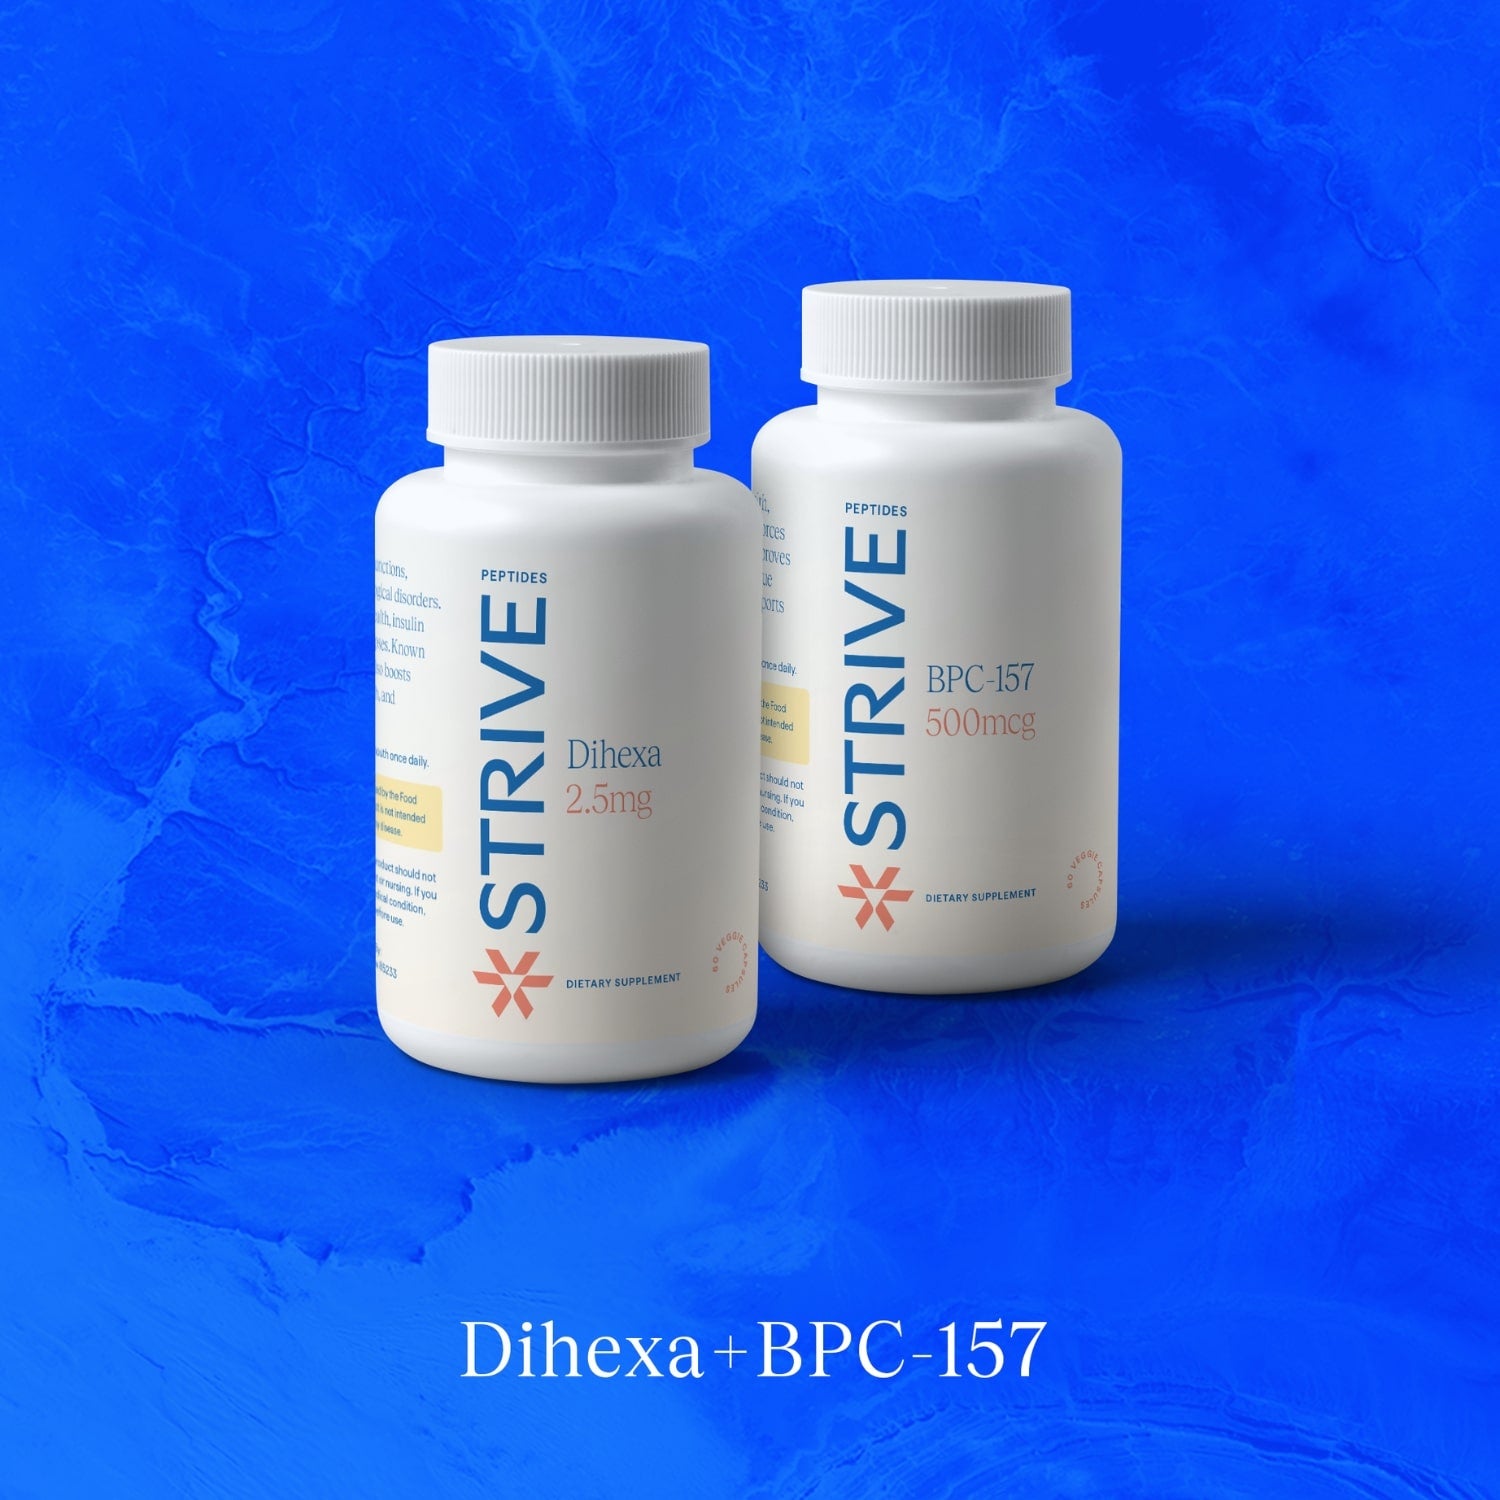 Two bottles from the Strive Peptides Dihexa and BPC-157 product bundle over a blue textured background